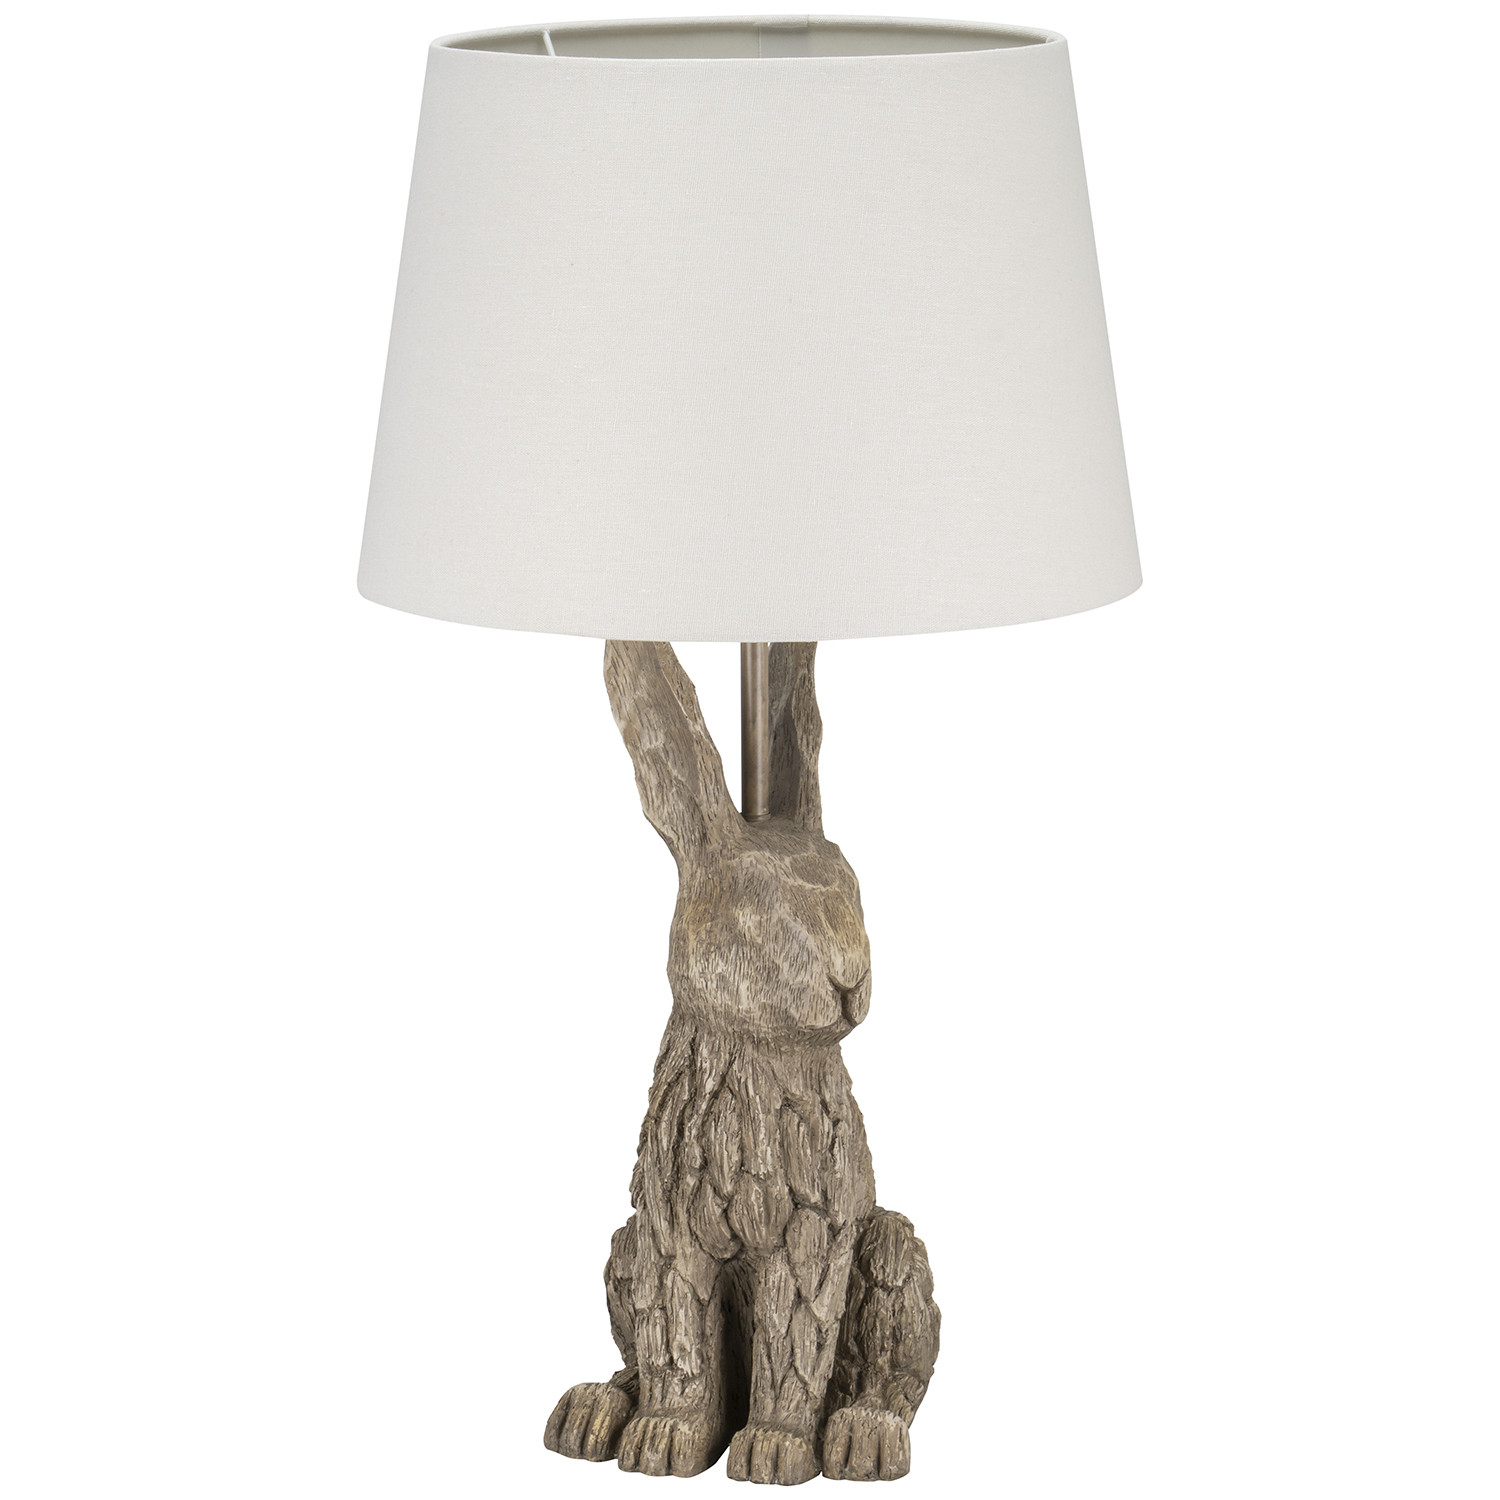 Neutral Driftwood Effect Rabbit Table Lamp Image 1